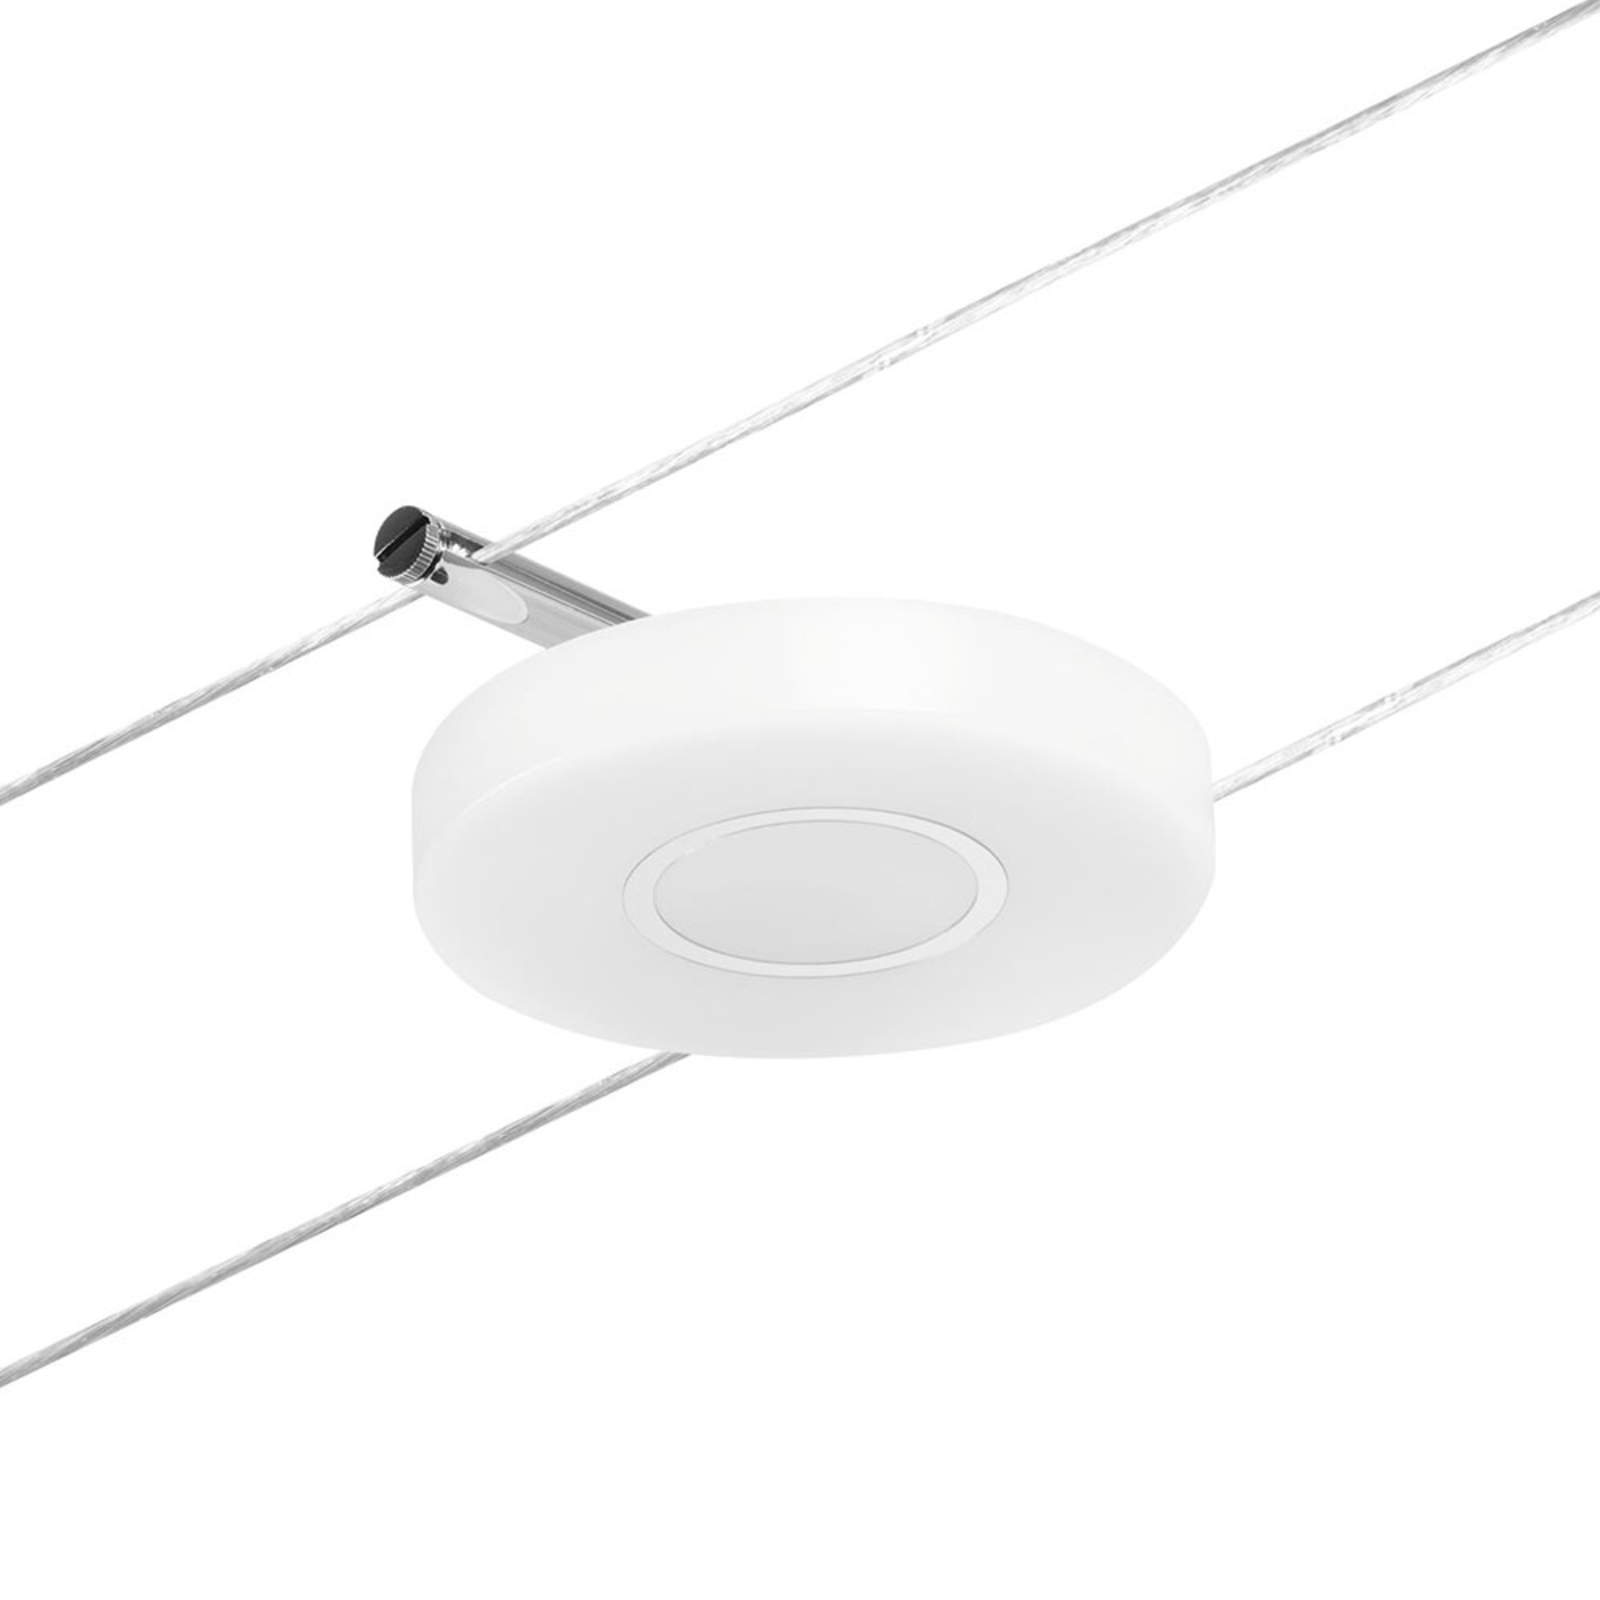 Paulmann Wire DiscLED LED kabelsysteem, 5-lamps